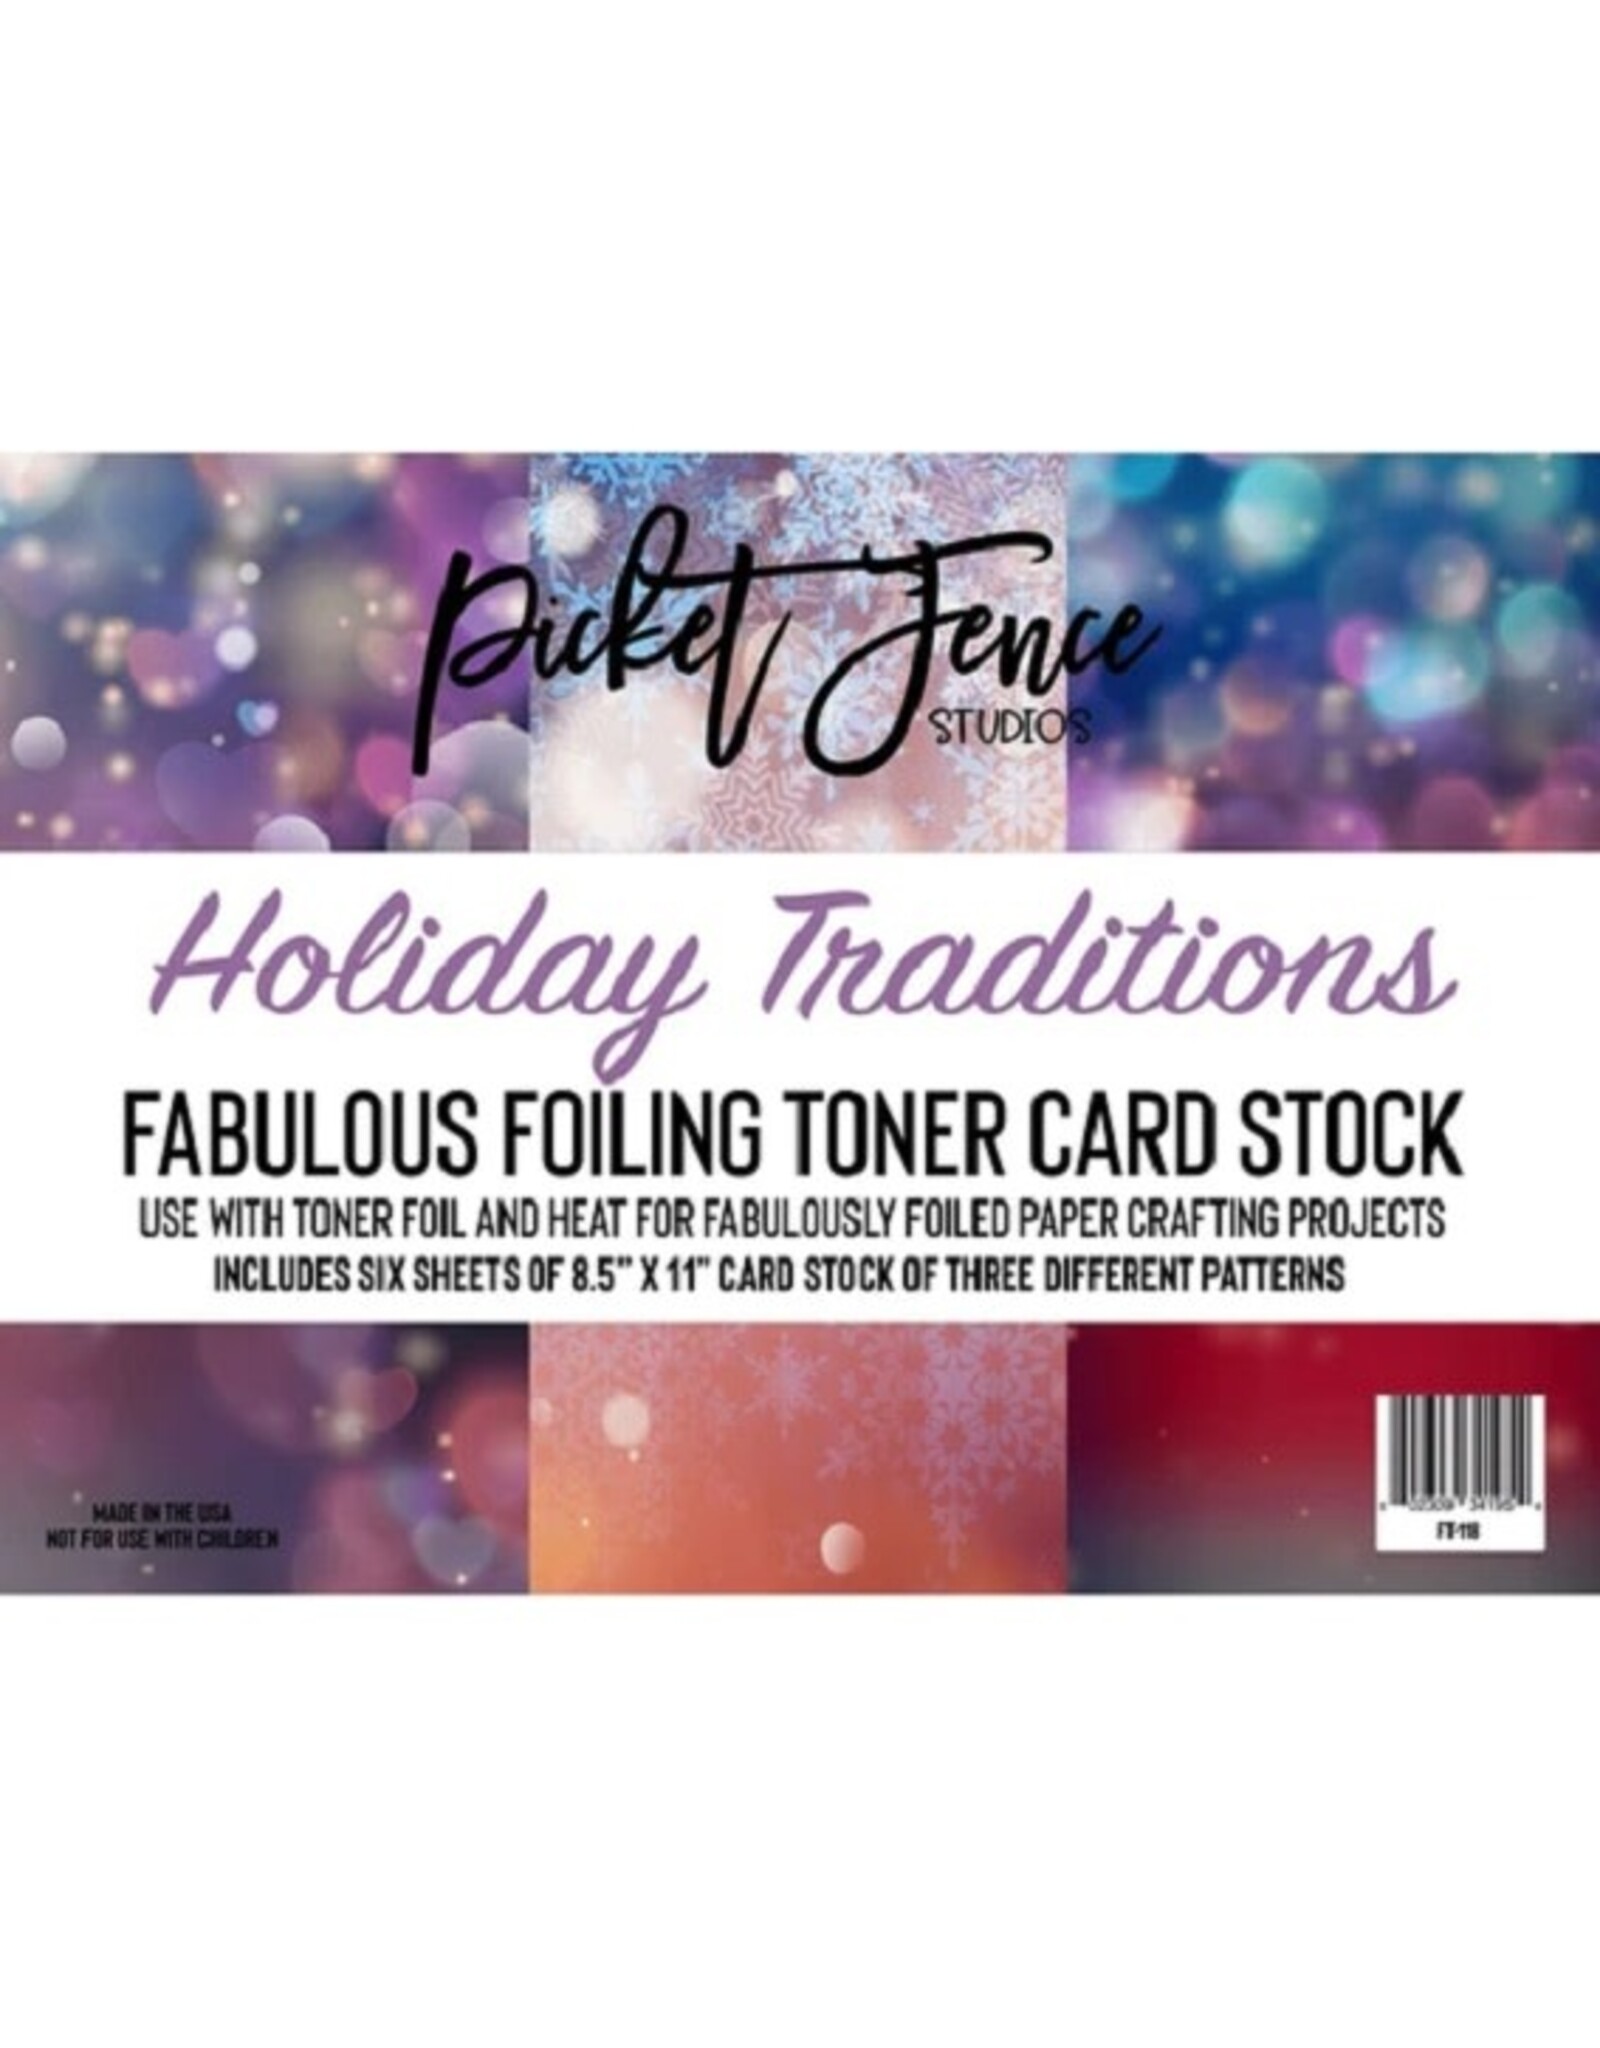 PICKET FENCE STUDIOS Fabulous Foiling Toner Card Stock - Holiday Traditions